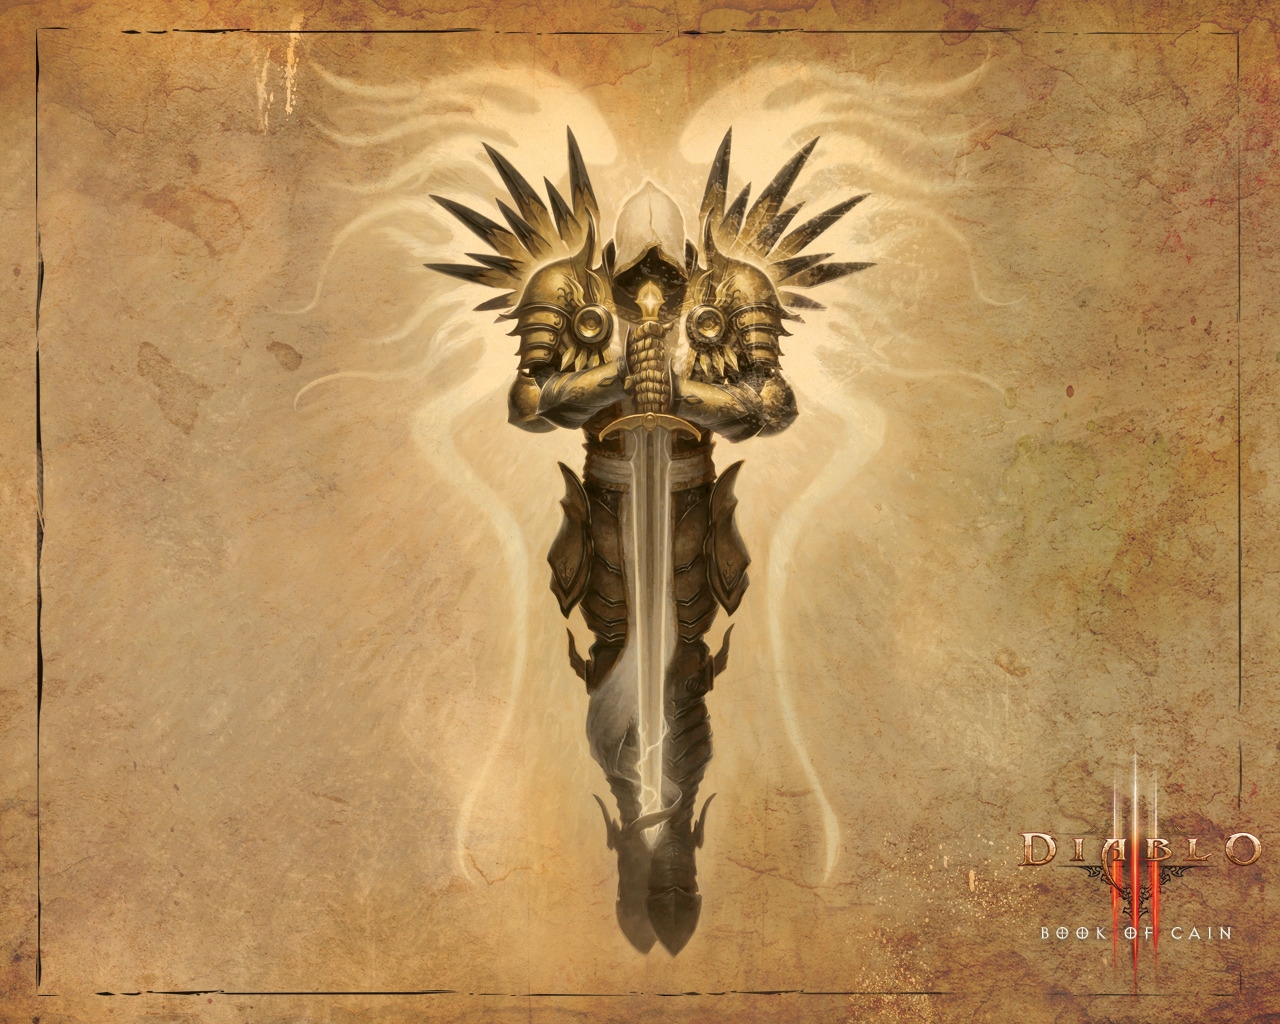 Book of Cain Diablo 3 for 1280 x 1024 resolution